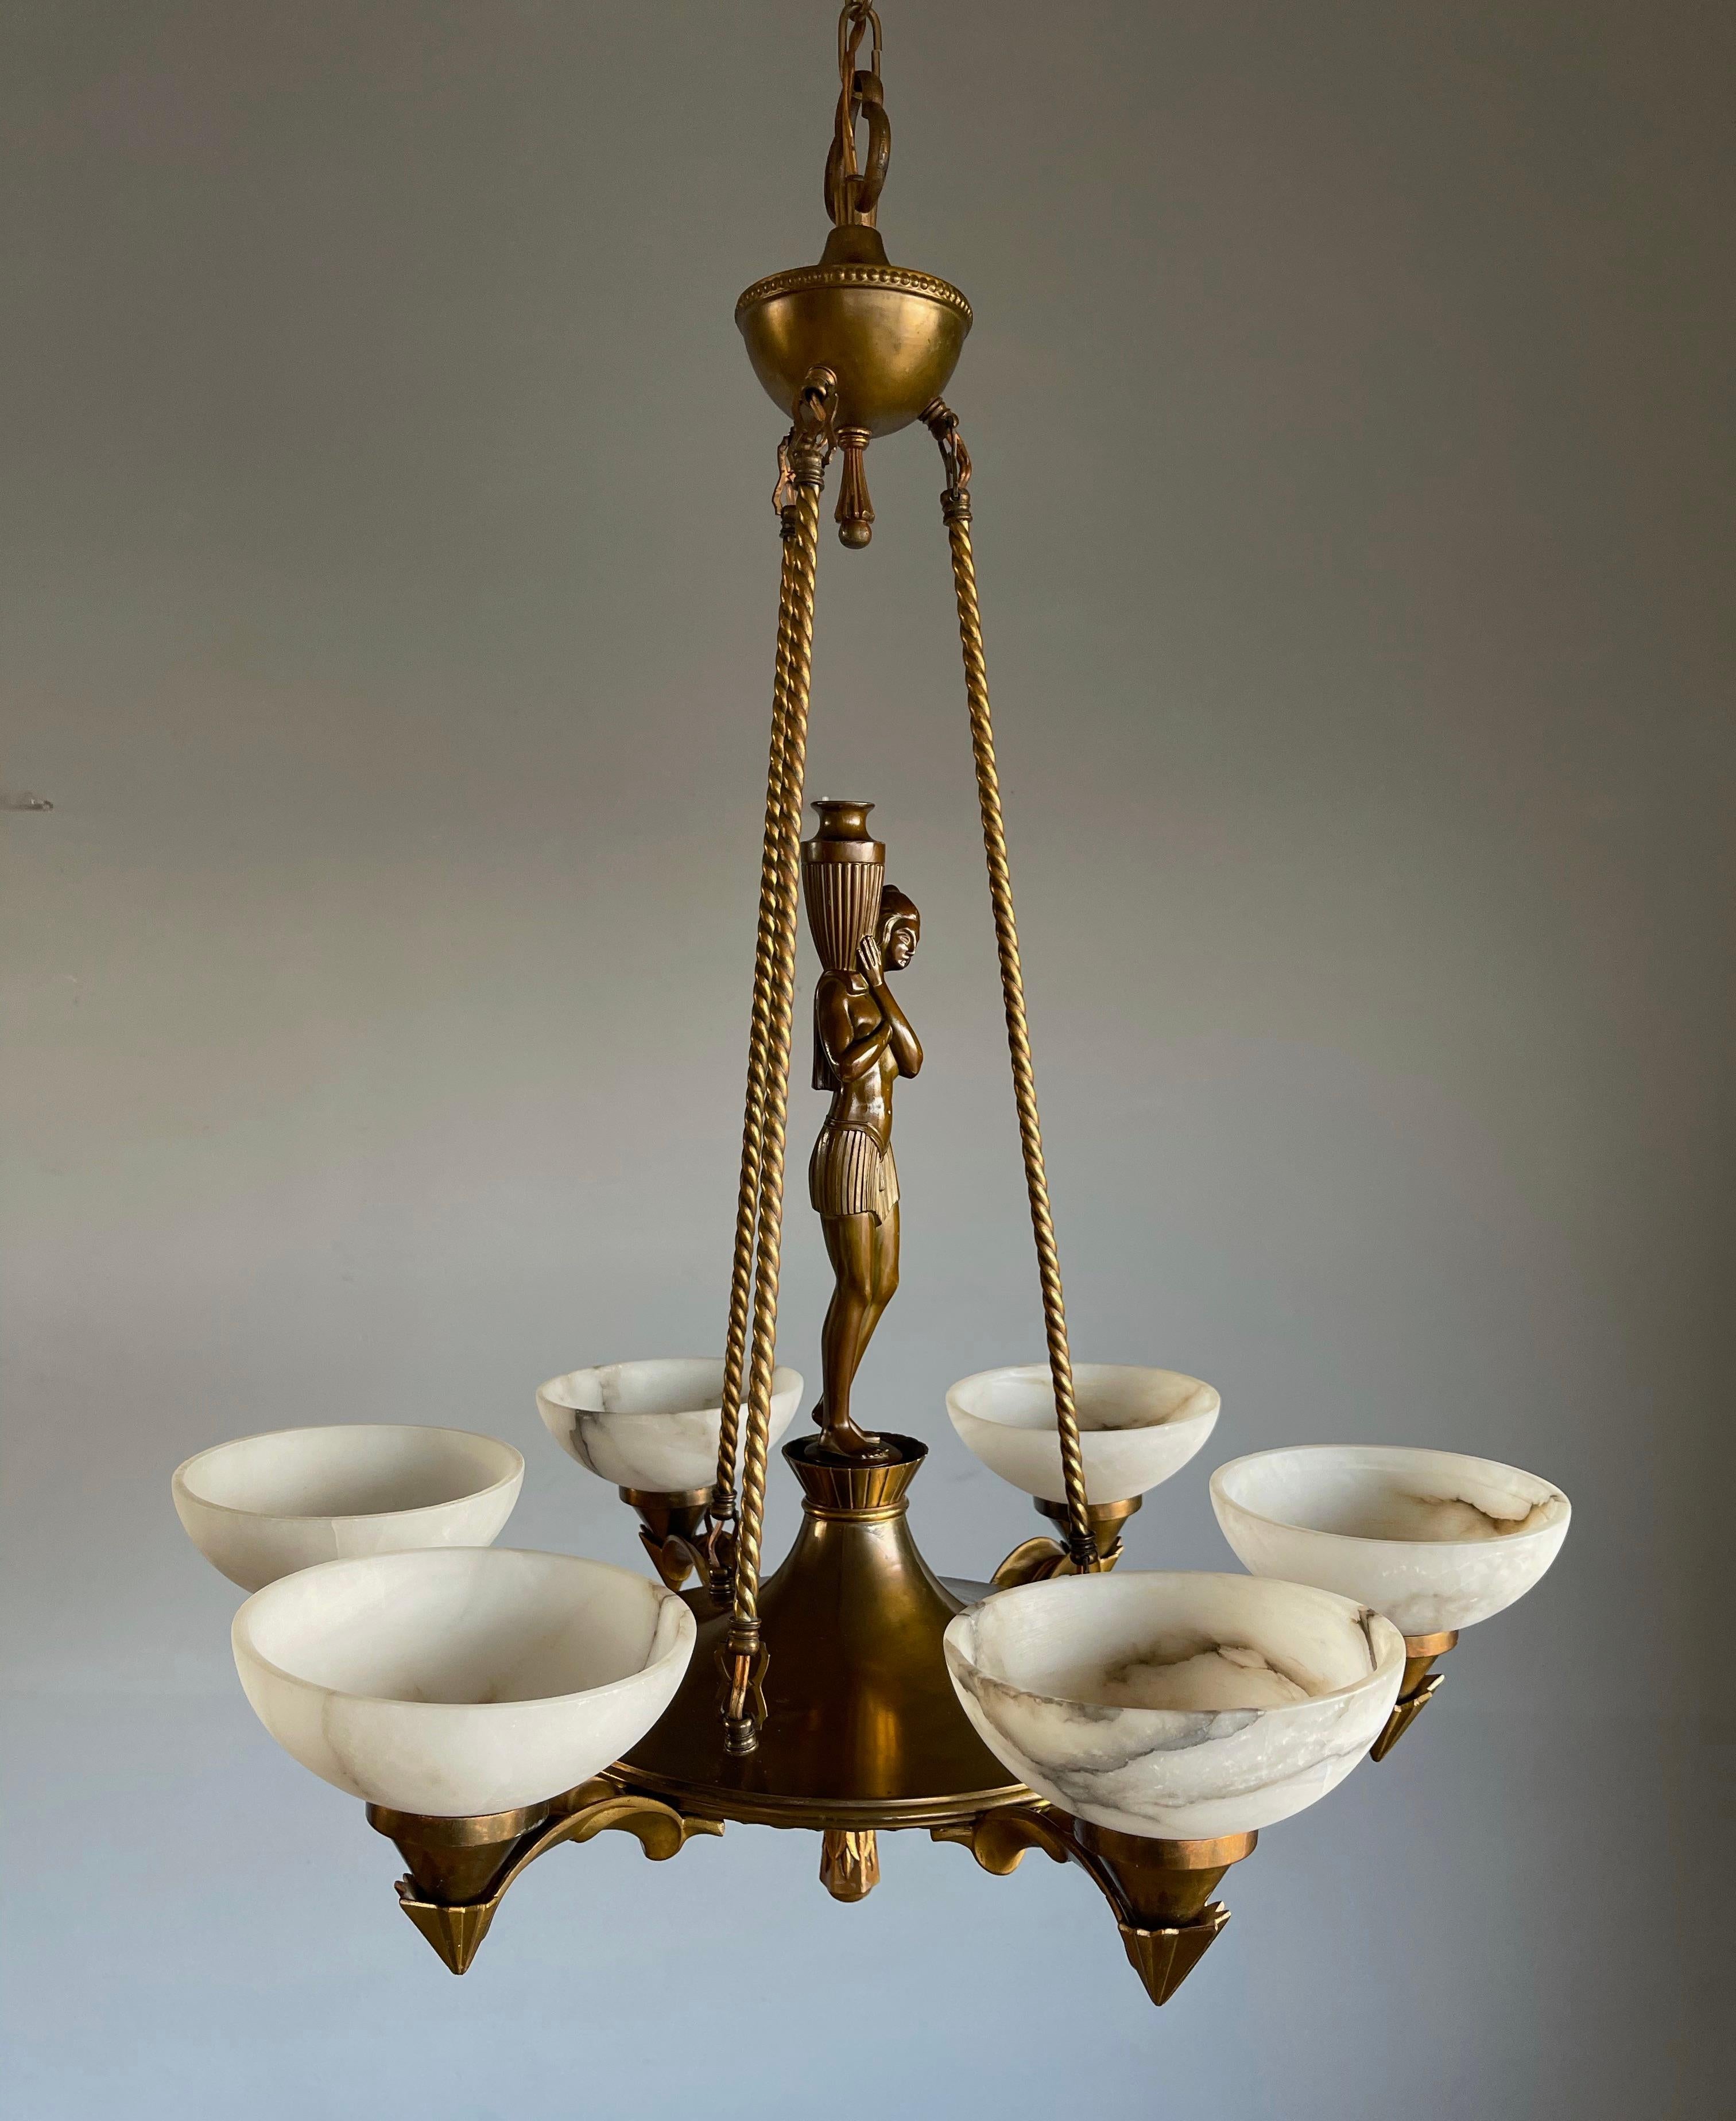 Pure and Stylish Art Deco Sculpture Chandelier w Stunning Alabaster Shades 1920s For Sale 10